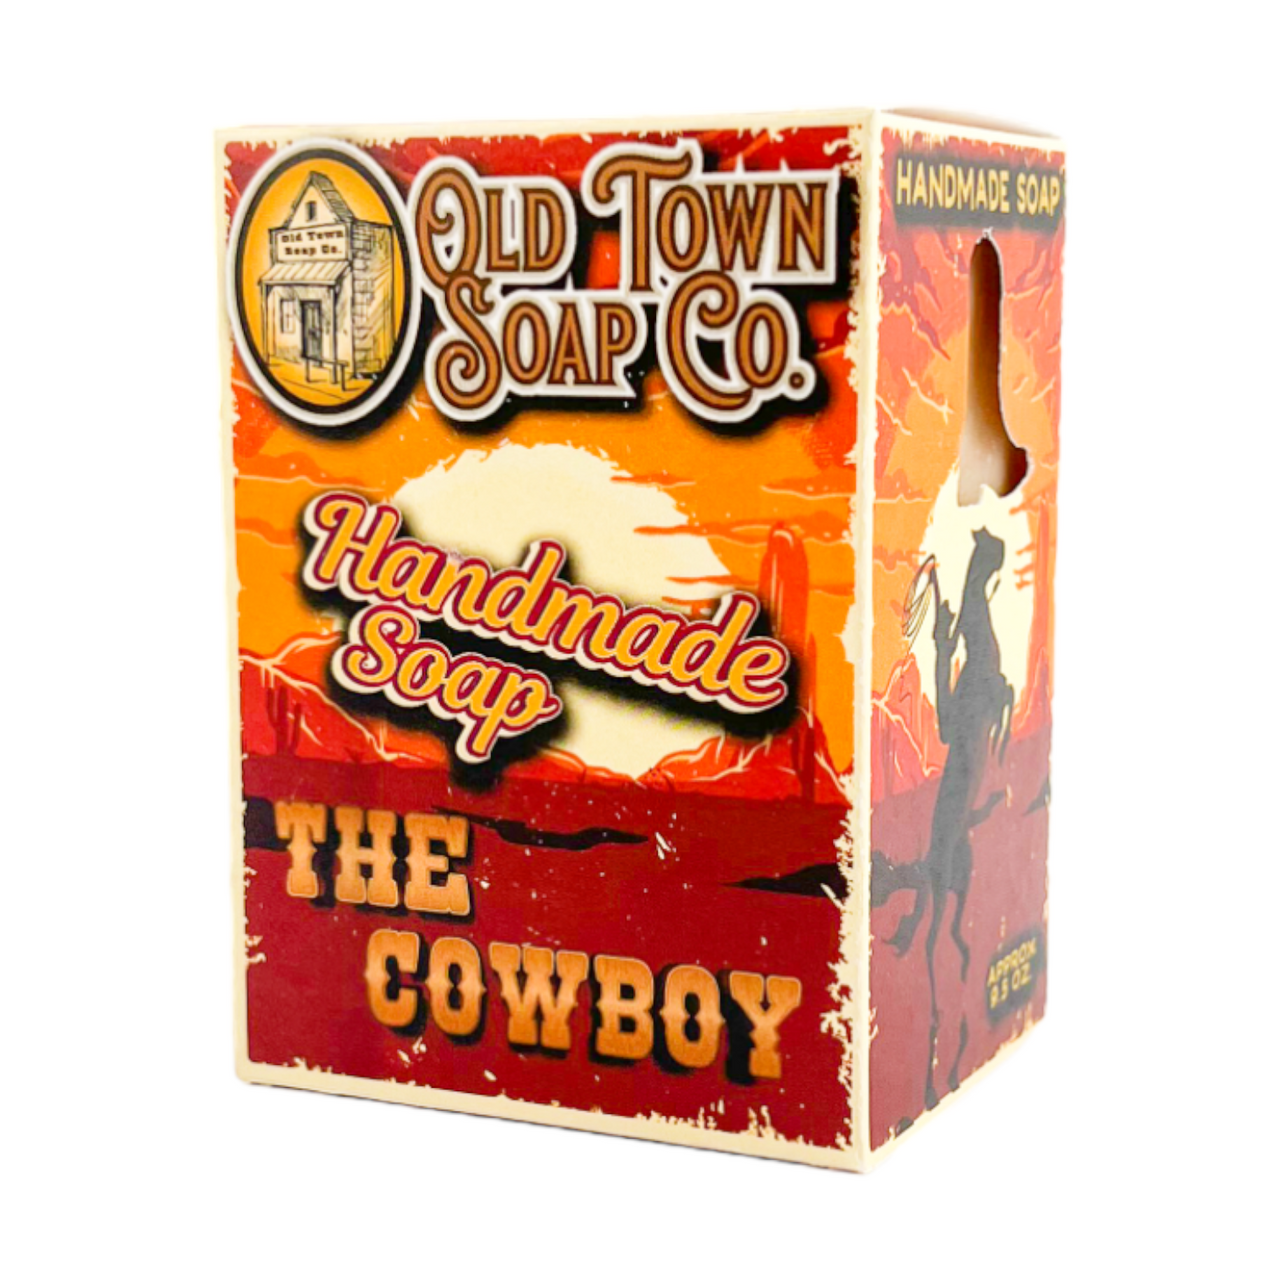 The Cowboy - Big Bar Soap - Old Town Soap Co.